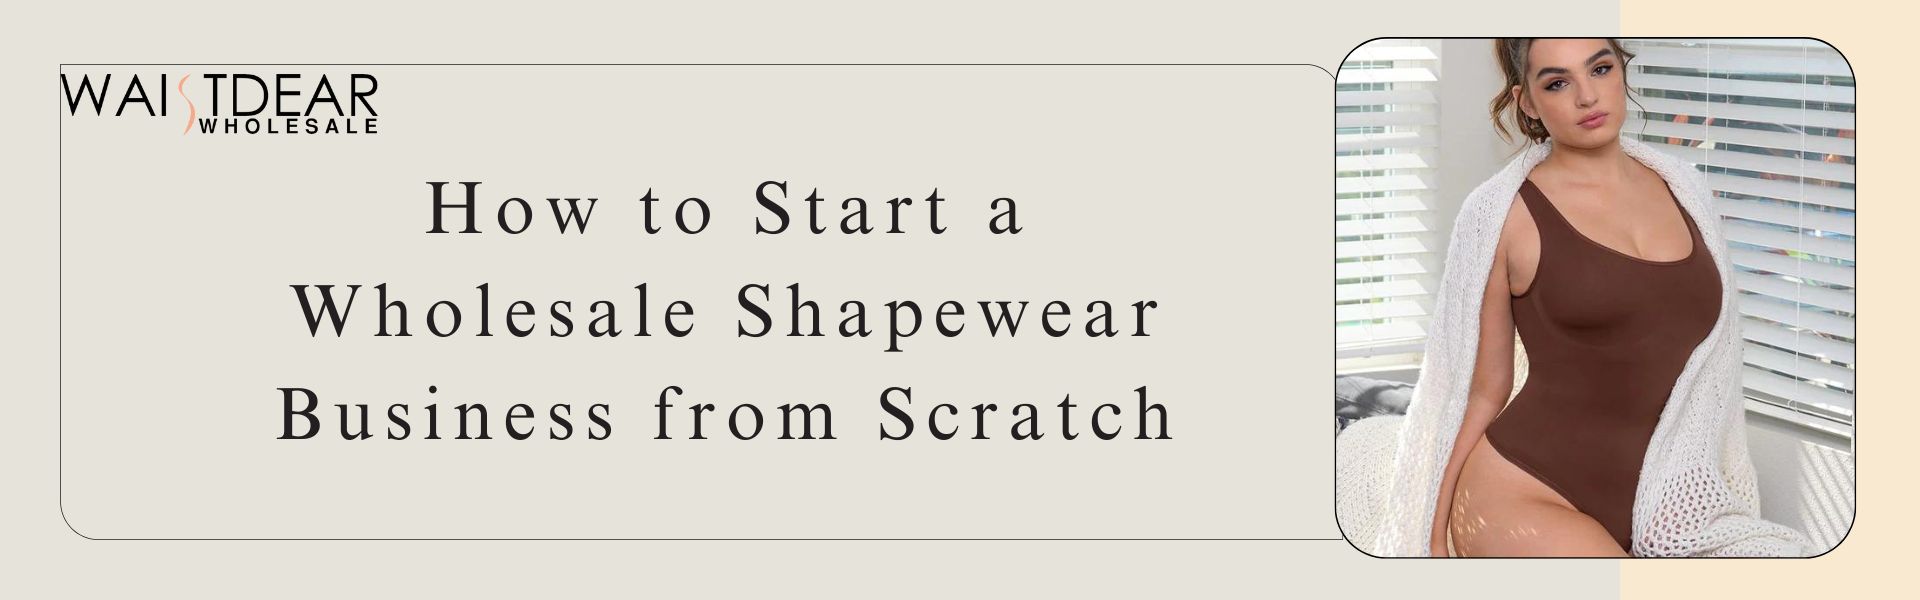 How to Start a Wholesale Shapewear Business from Scratch?